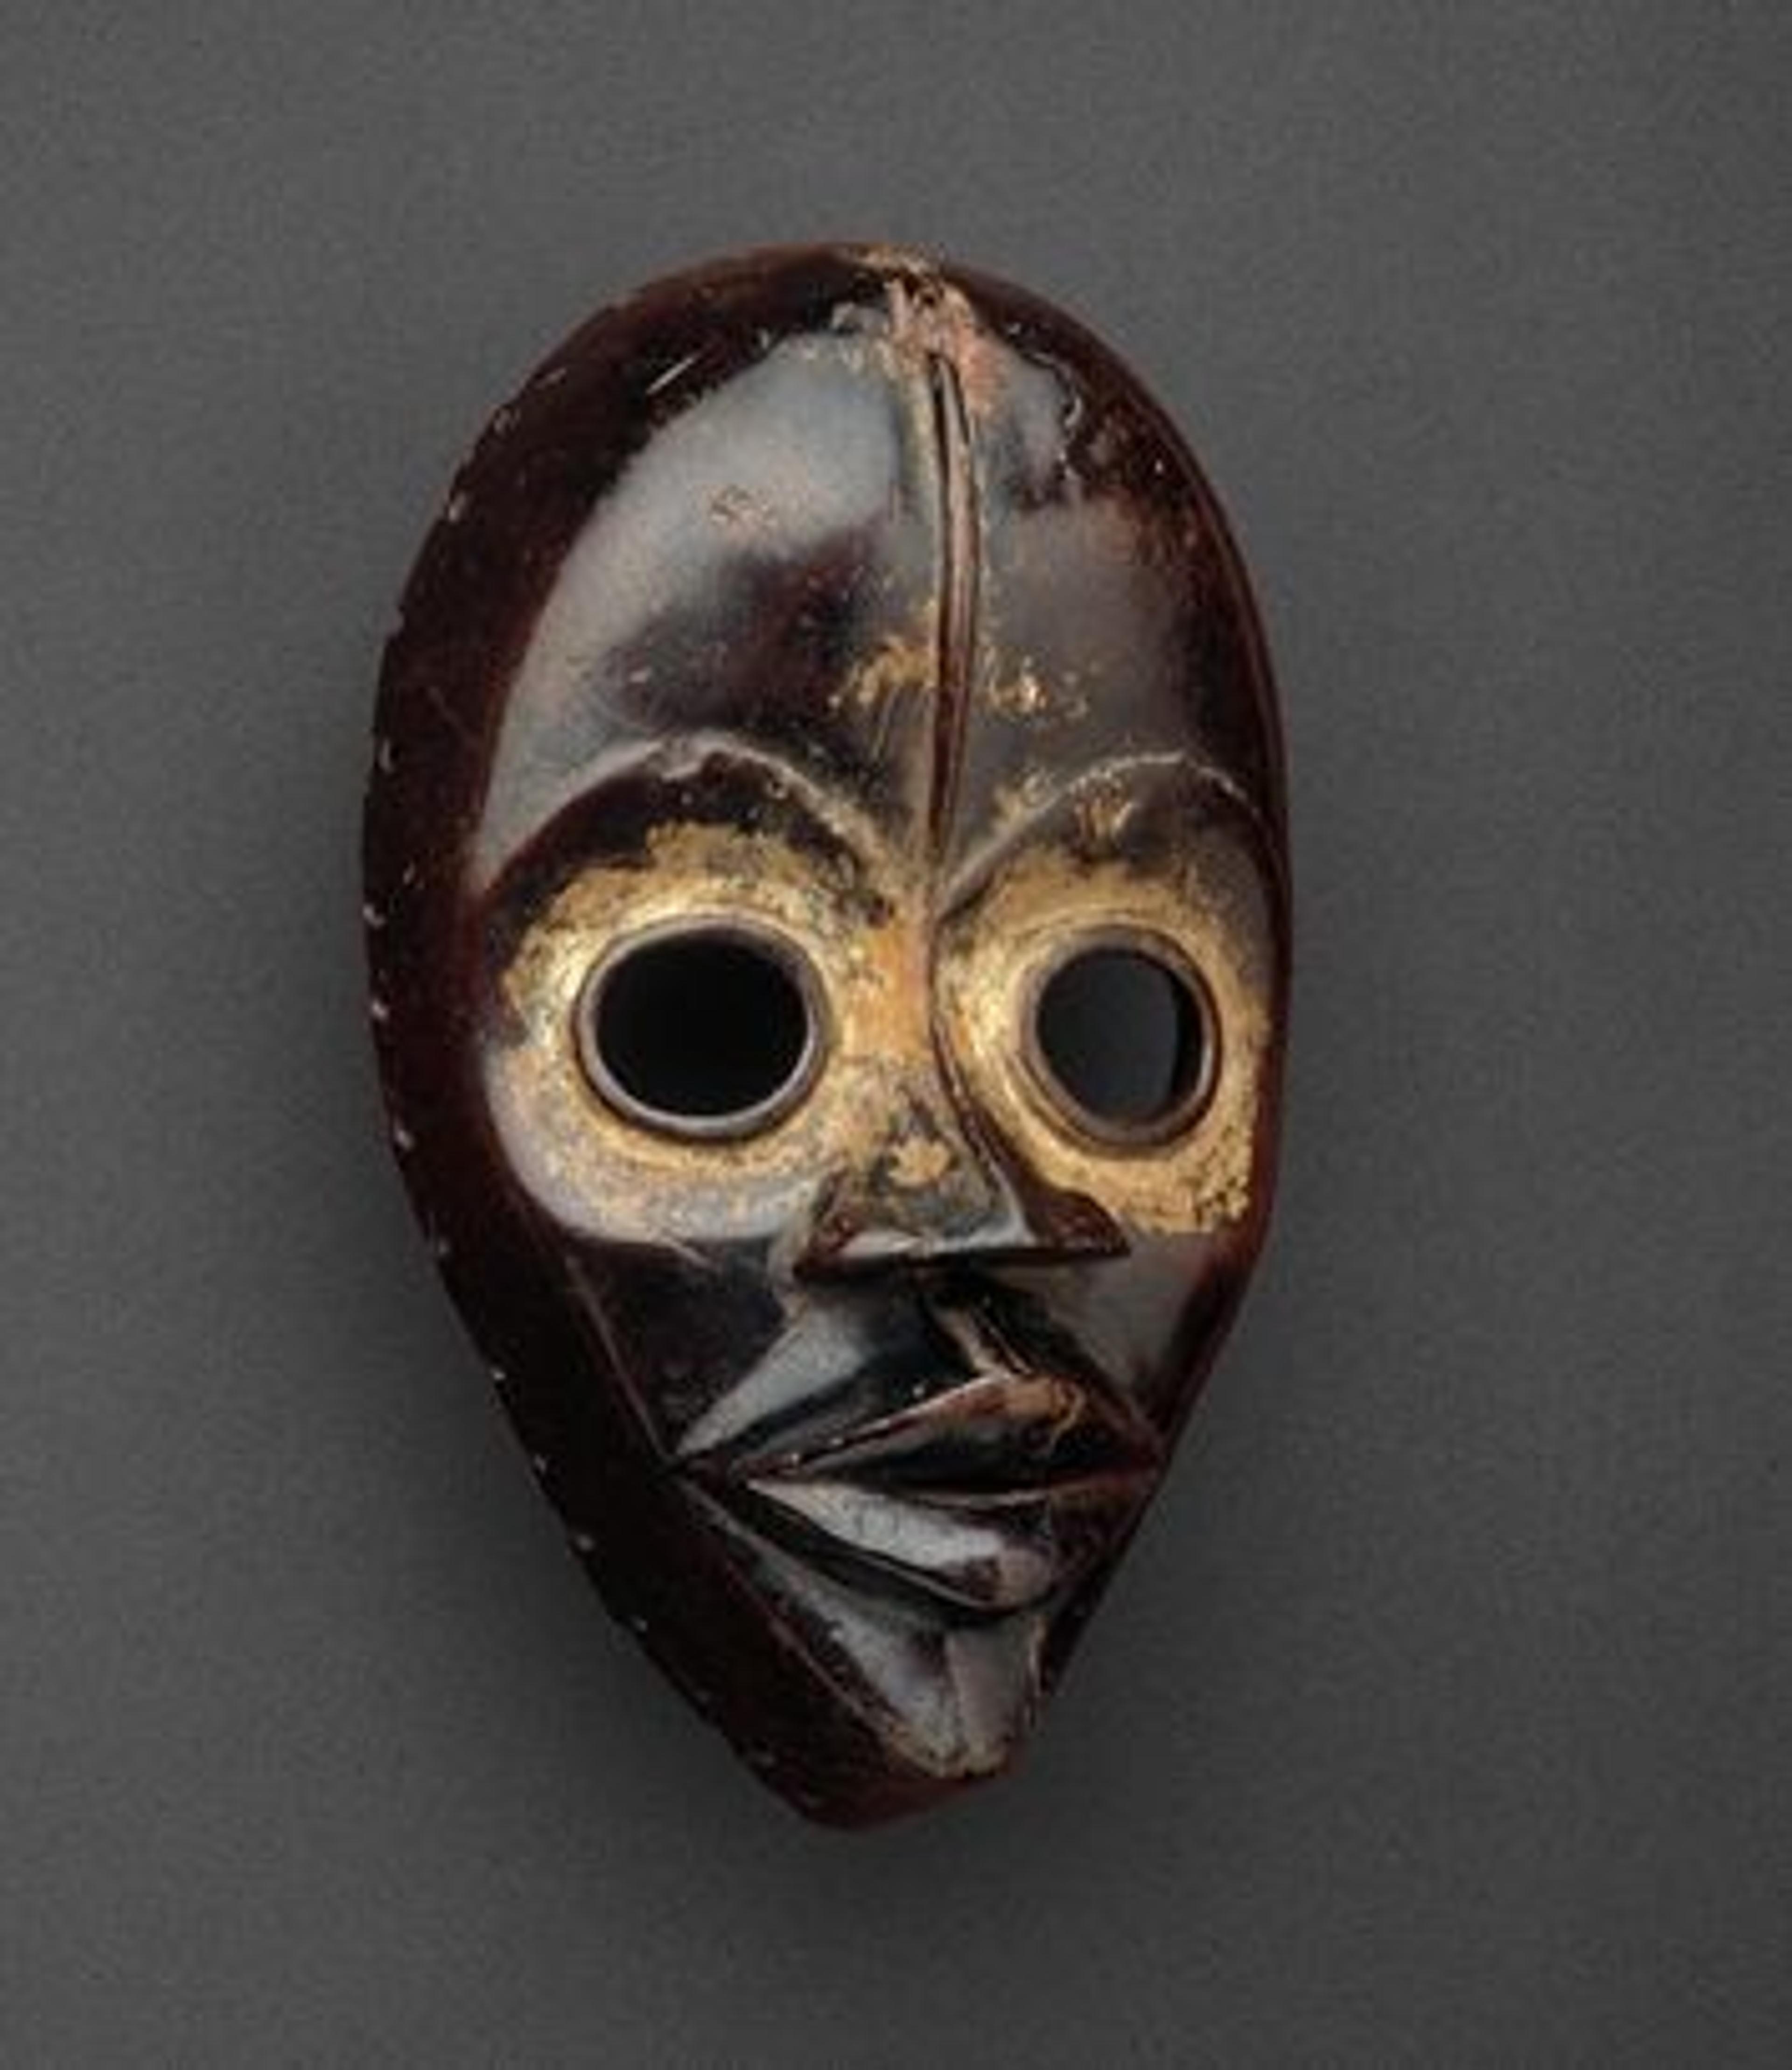 Mask made out of dark wood